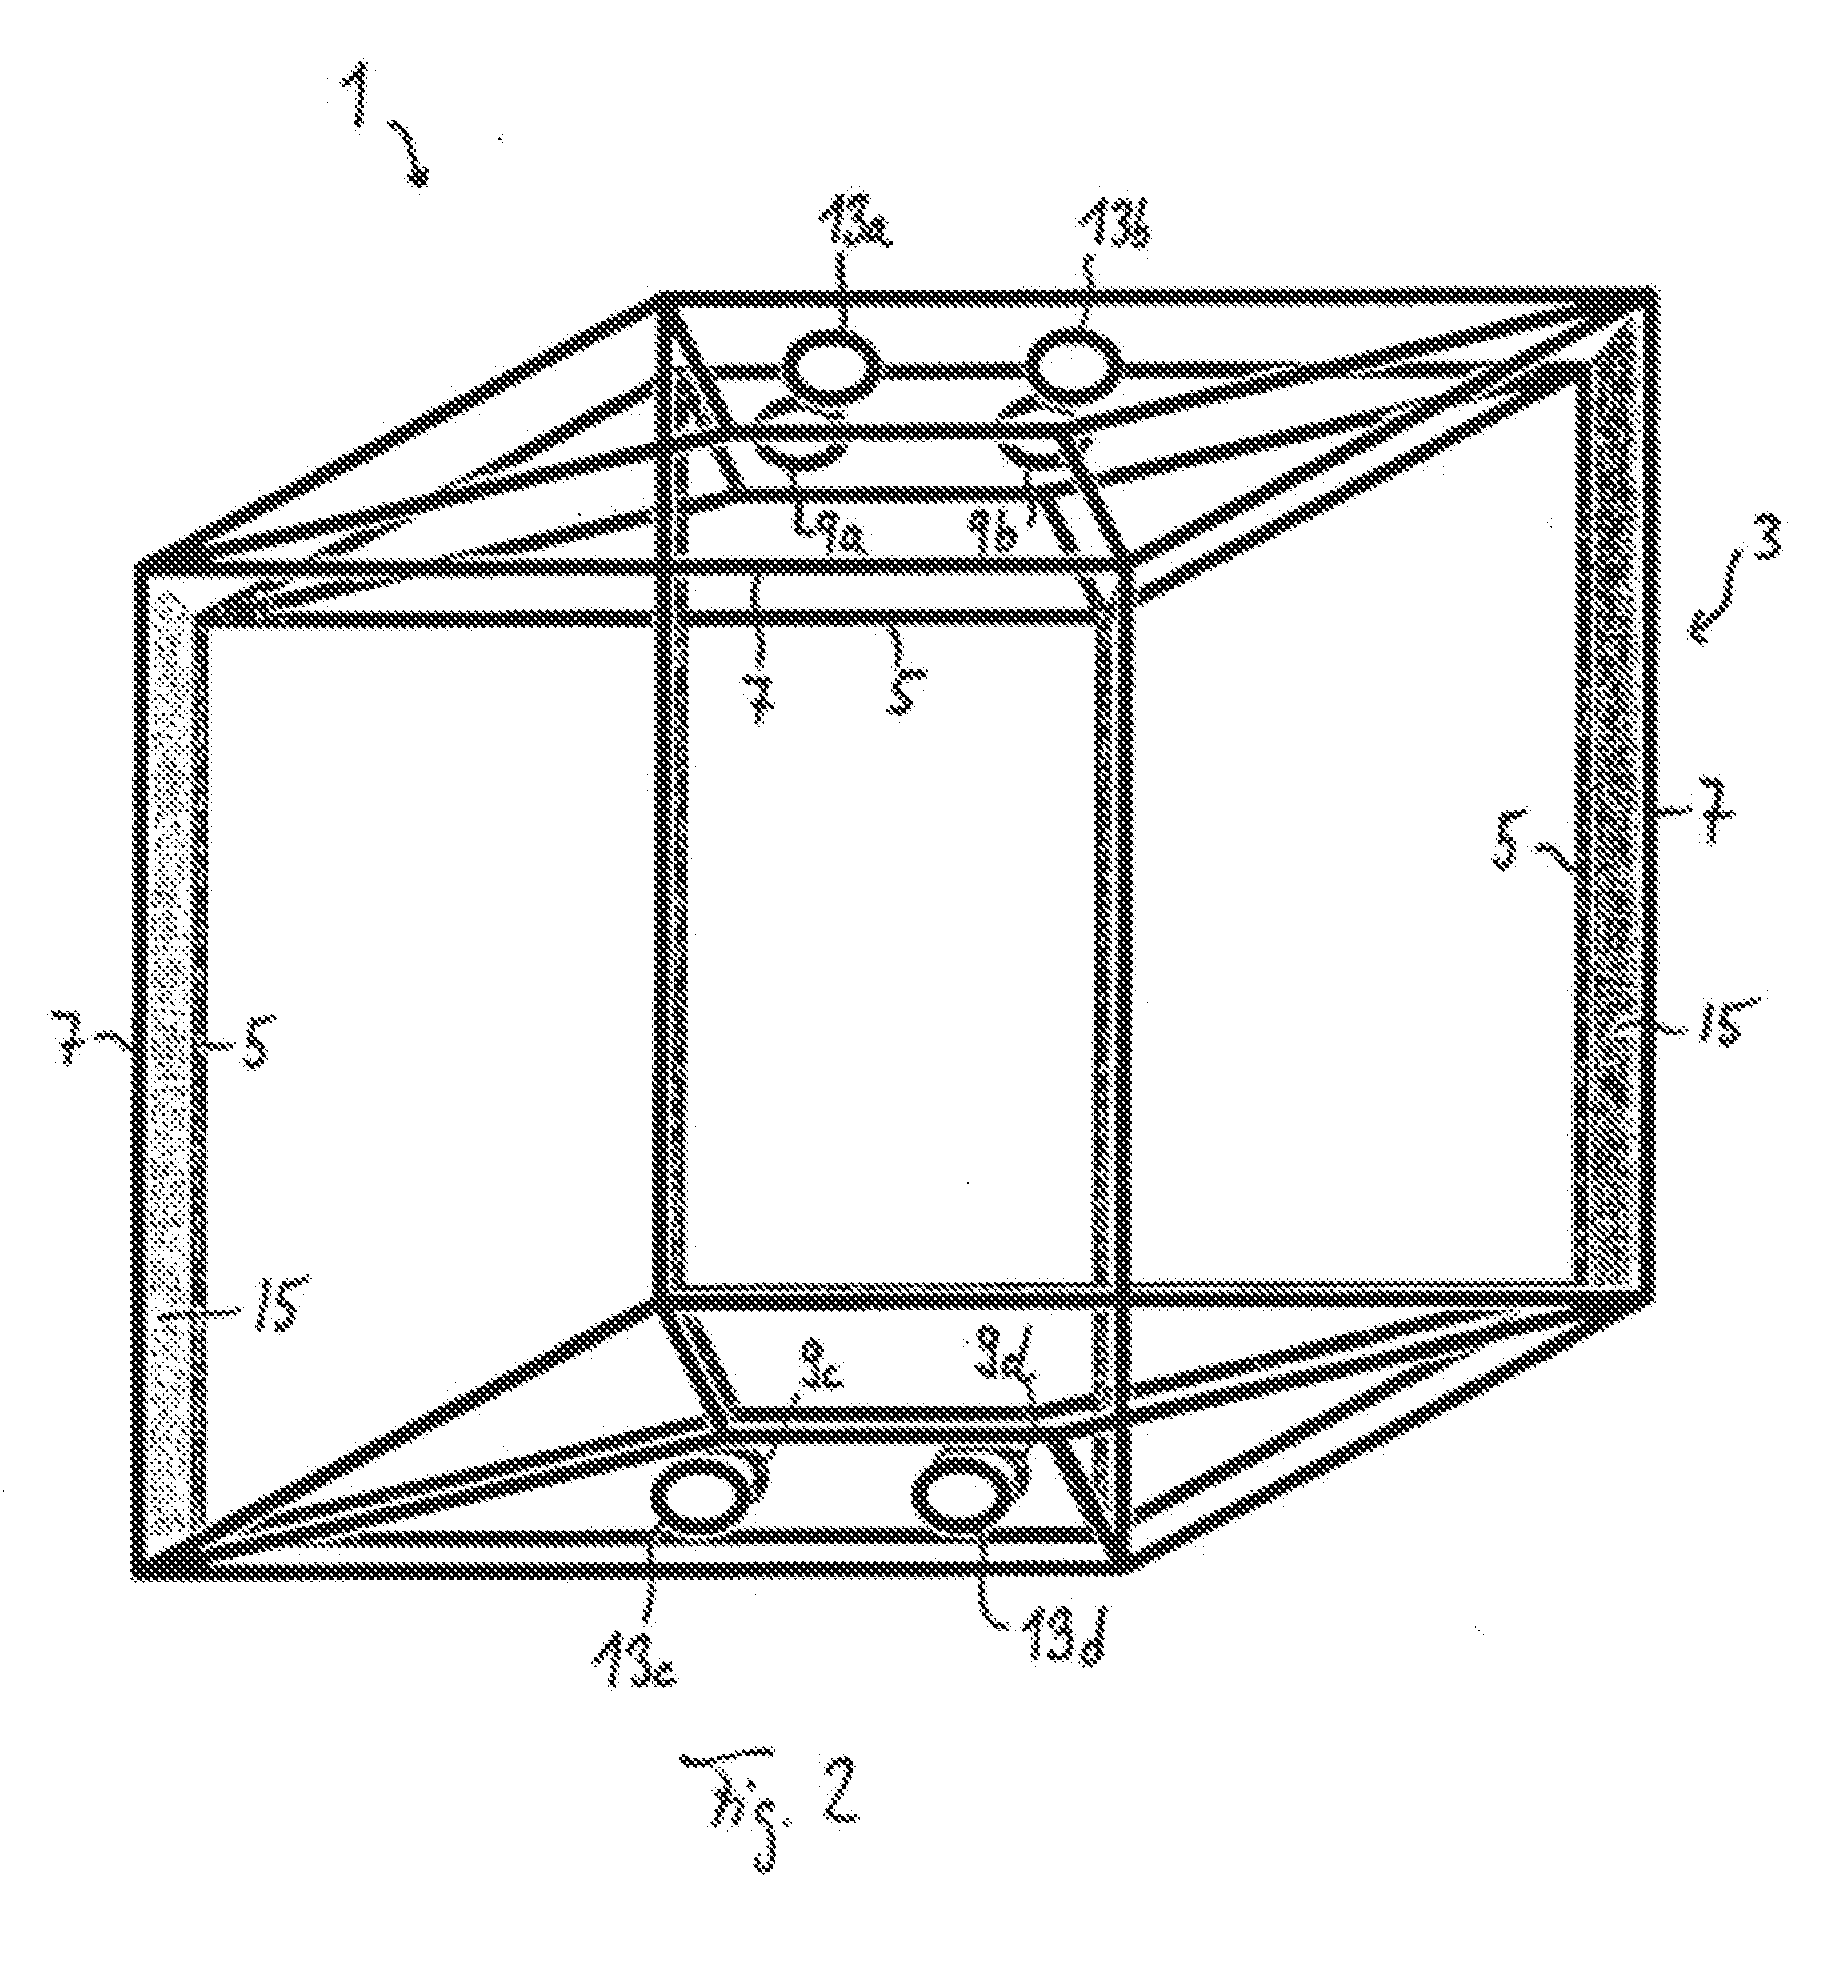 Bioreactor container and integrity check method for bioreactor containers